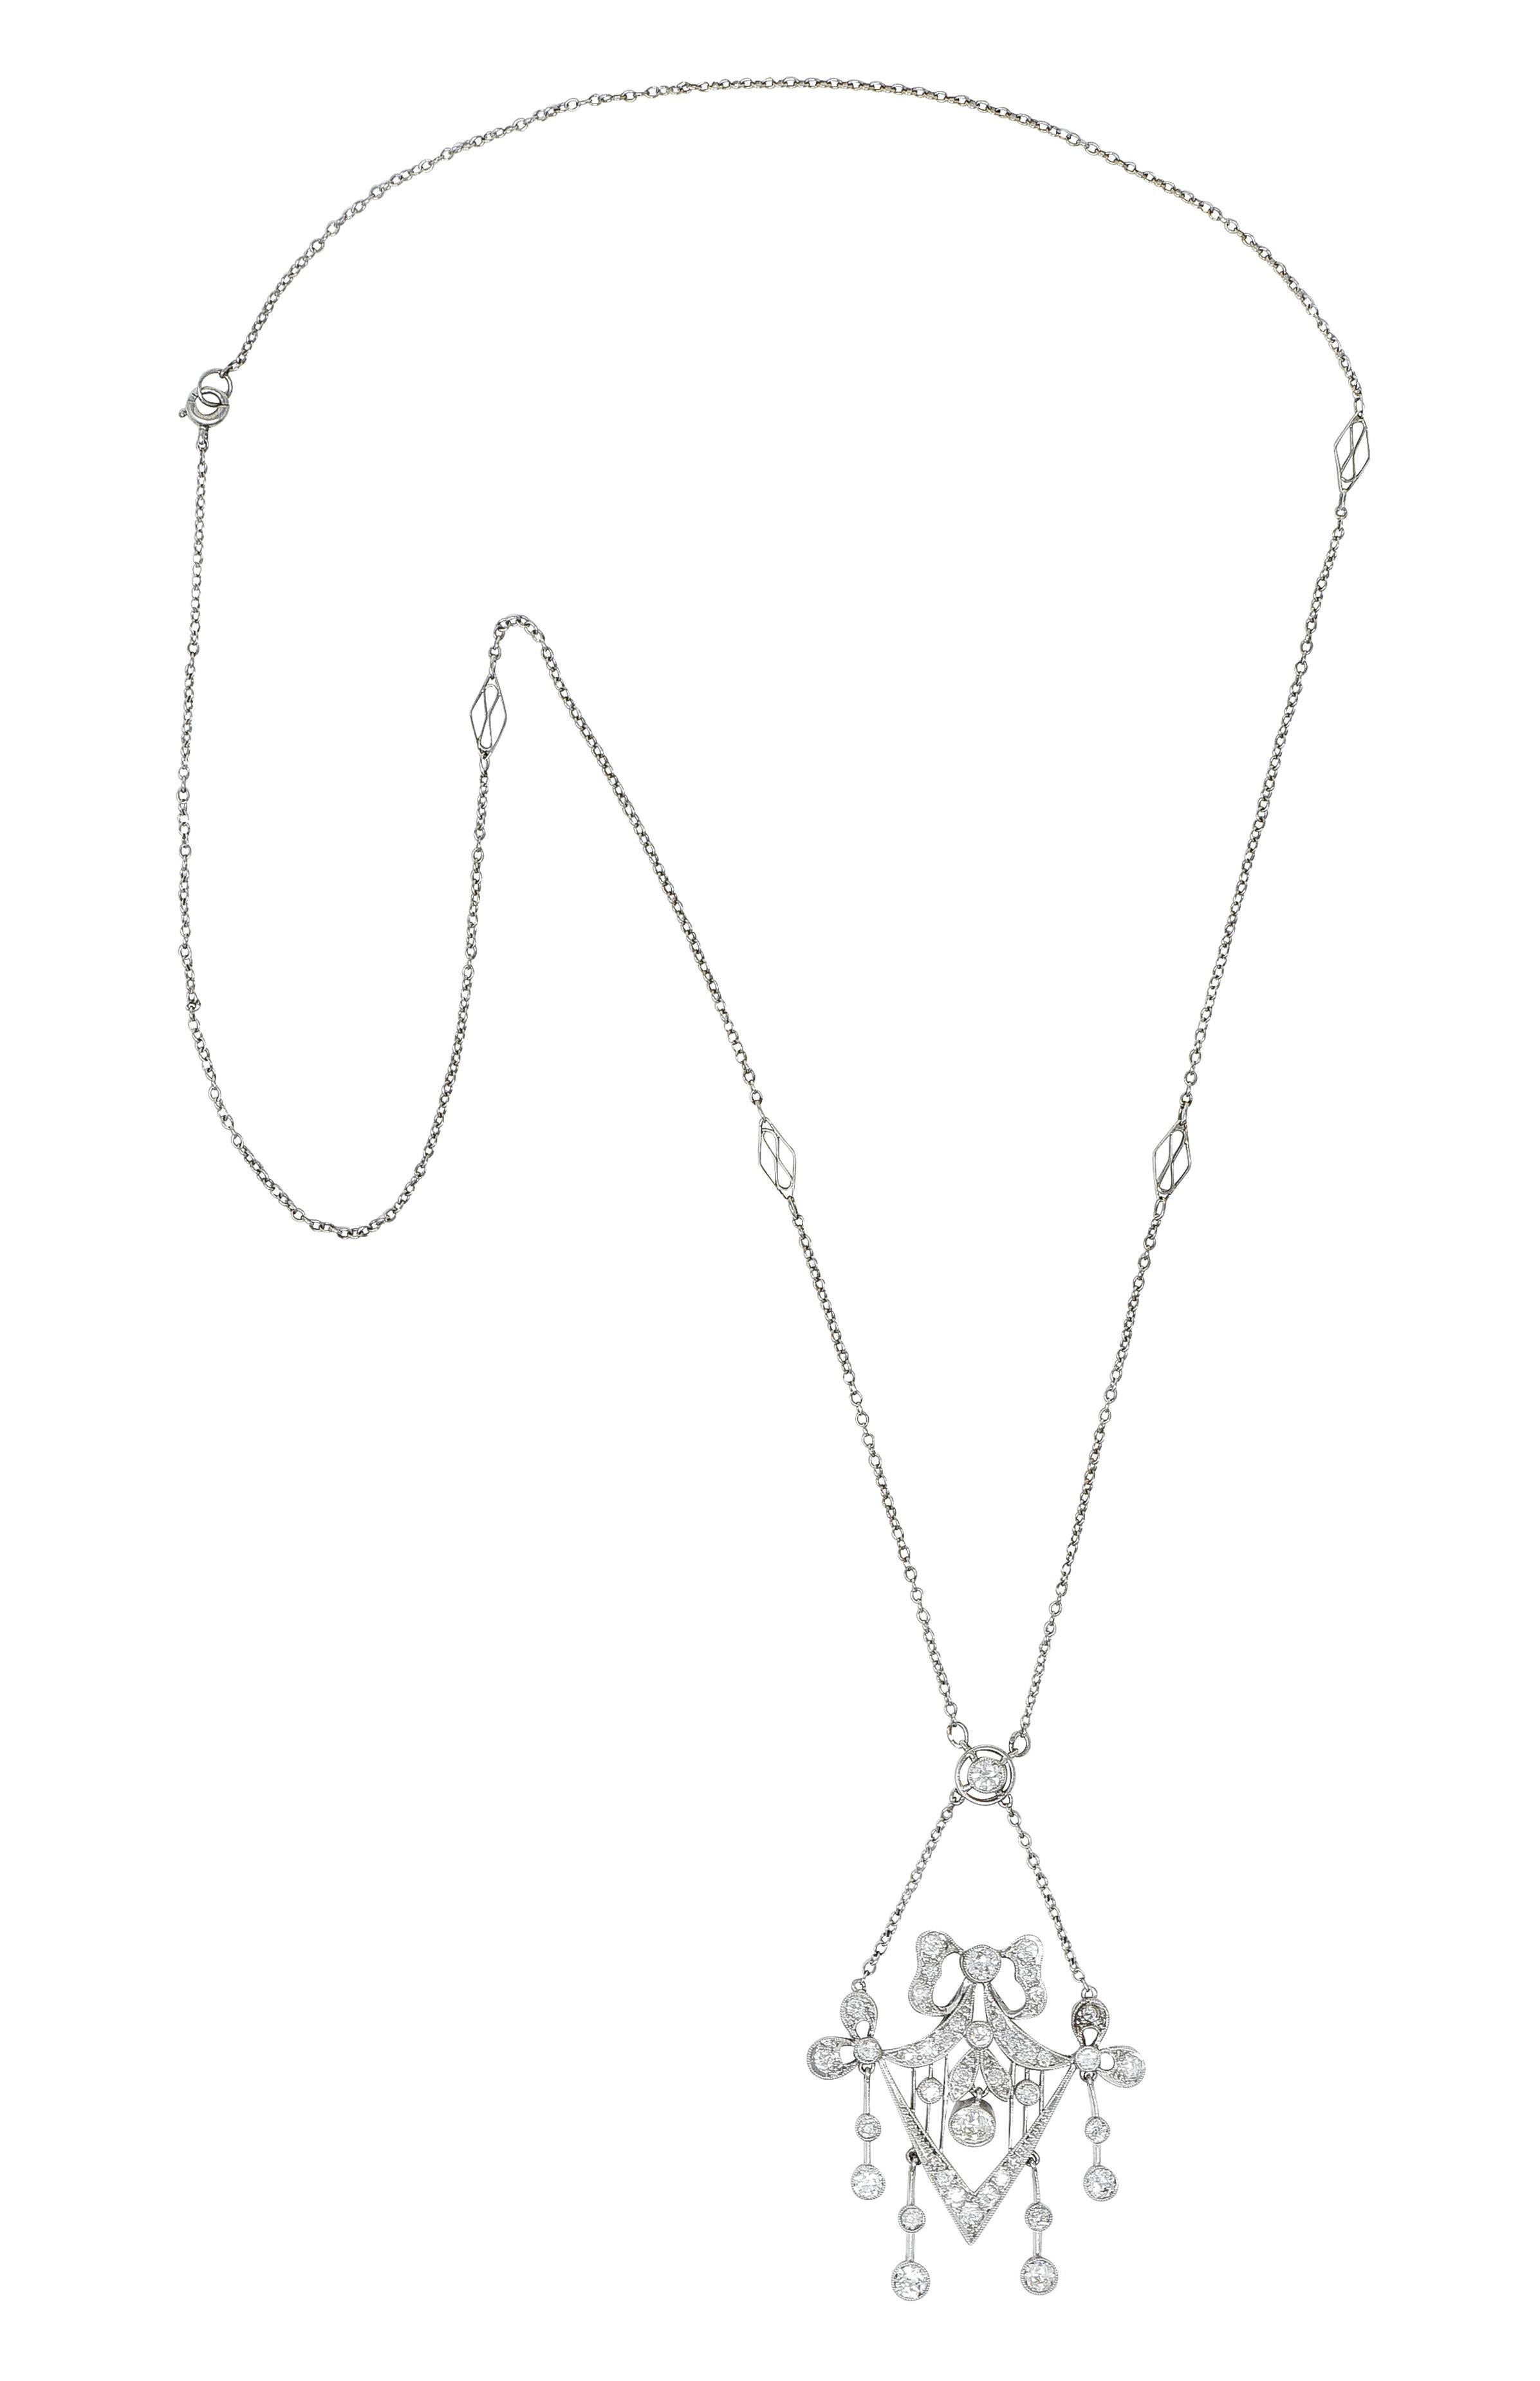 Long cable chain necklace with intermittent navette stations features a decorous center

With a circular surmount suspending swagged chain and terminating as a ribboned bow motif

Decorated with milgrain and knife edge striations - including